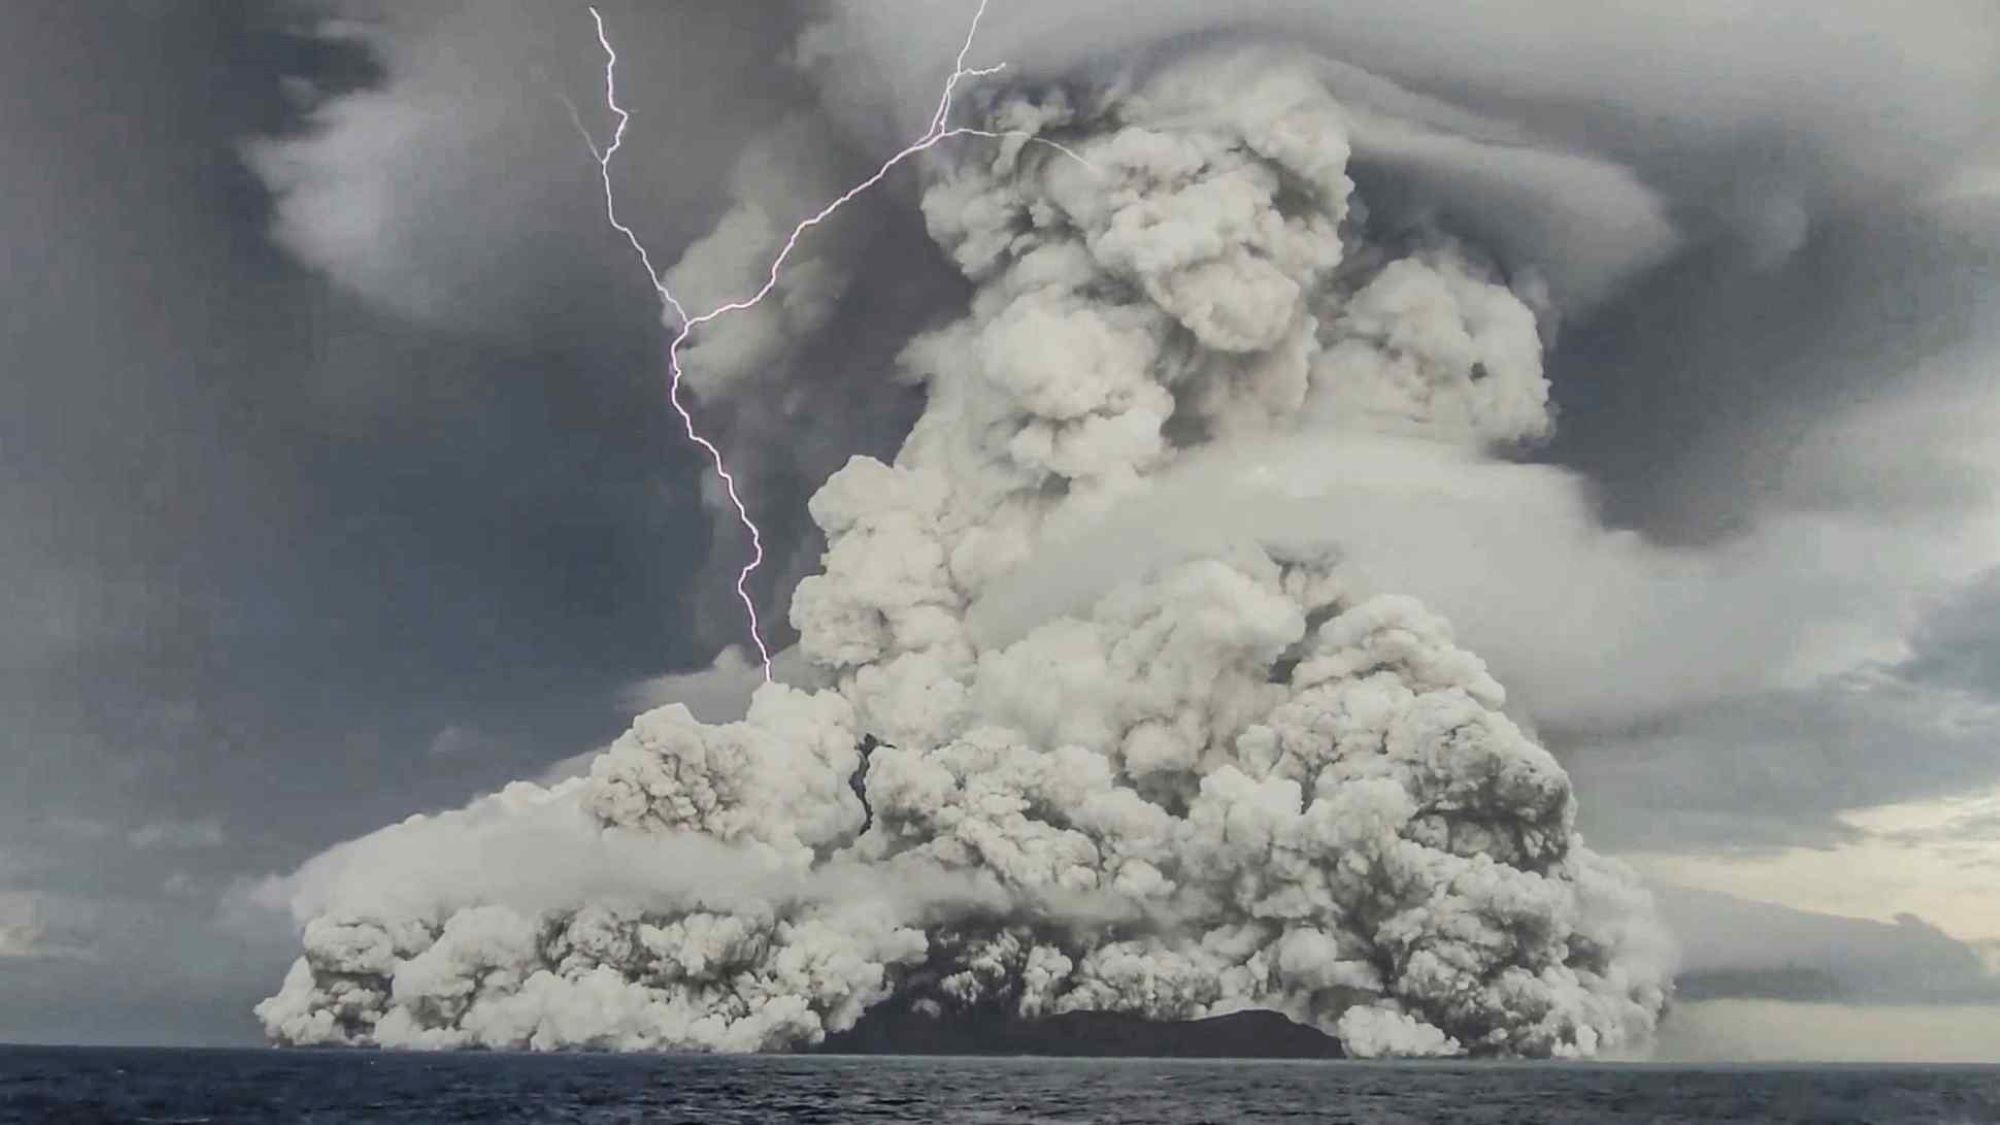 An eruption emerges from the ocean in a cloud of ash and a lightning strike.